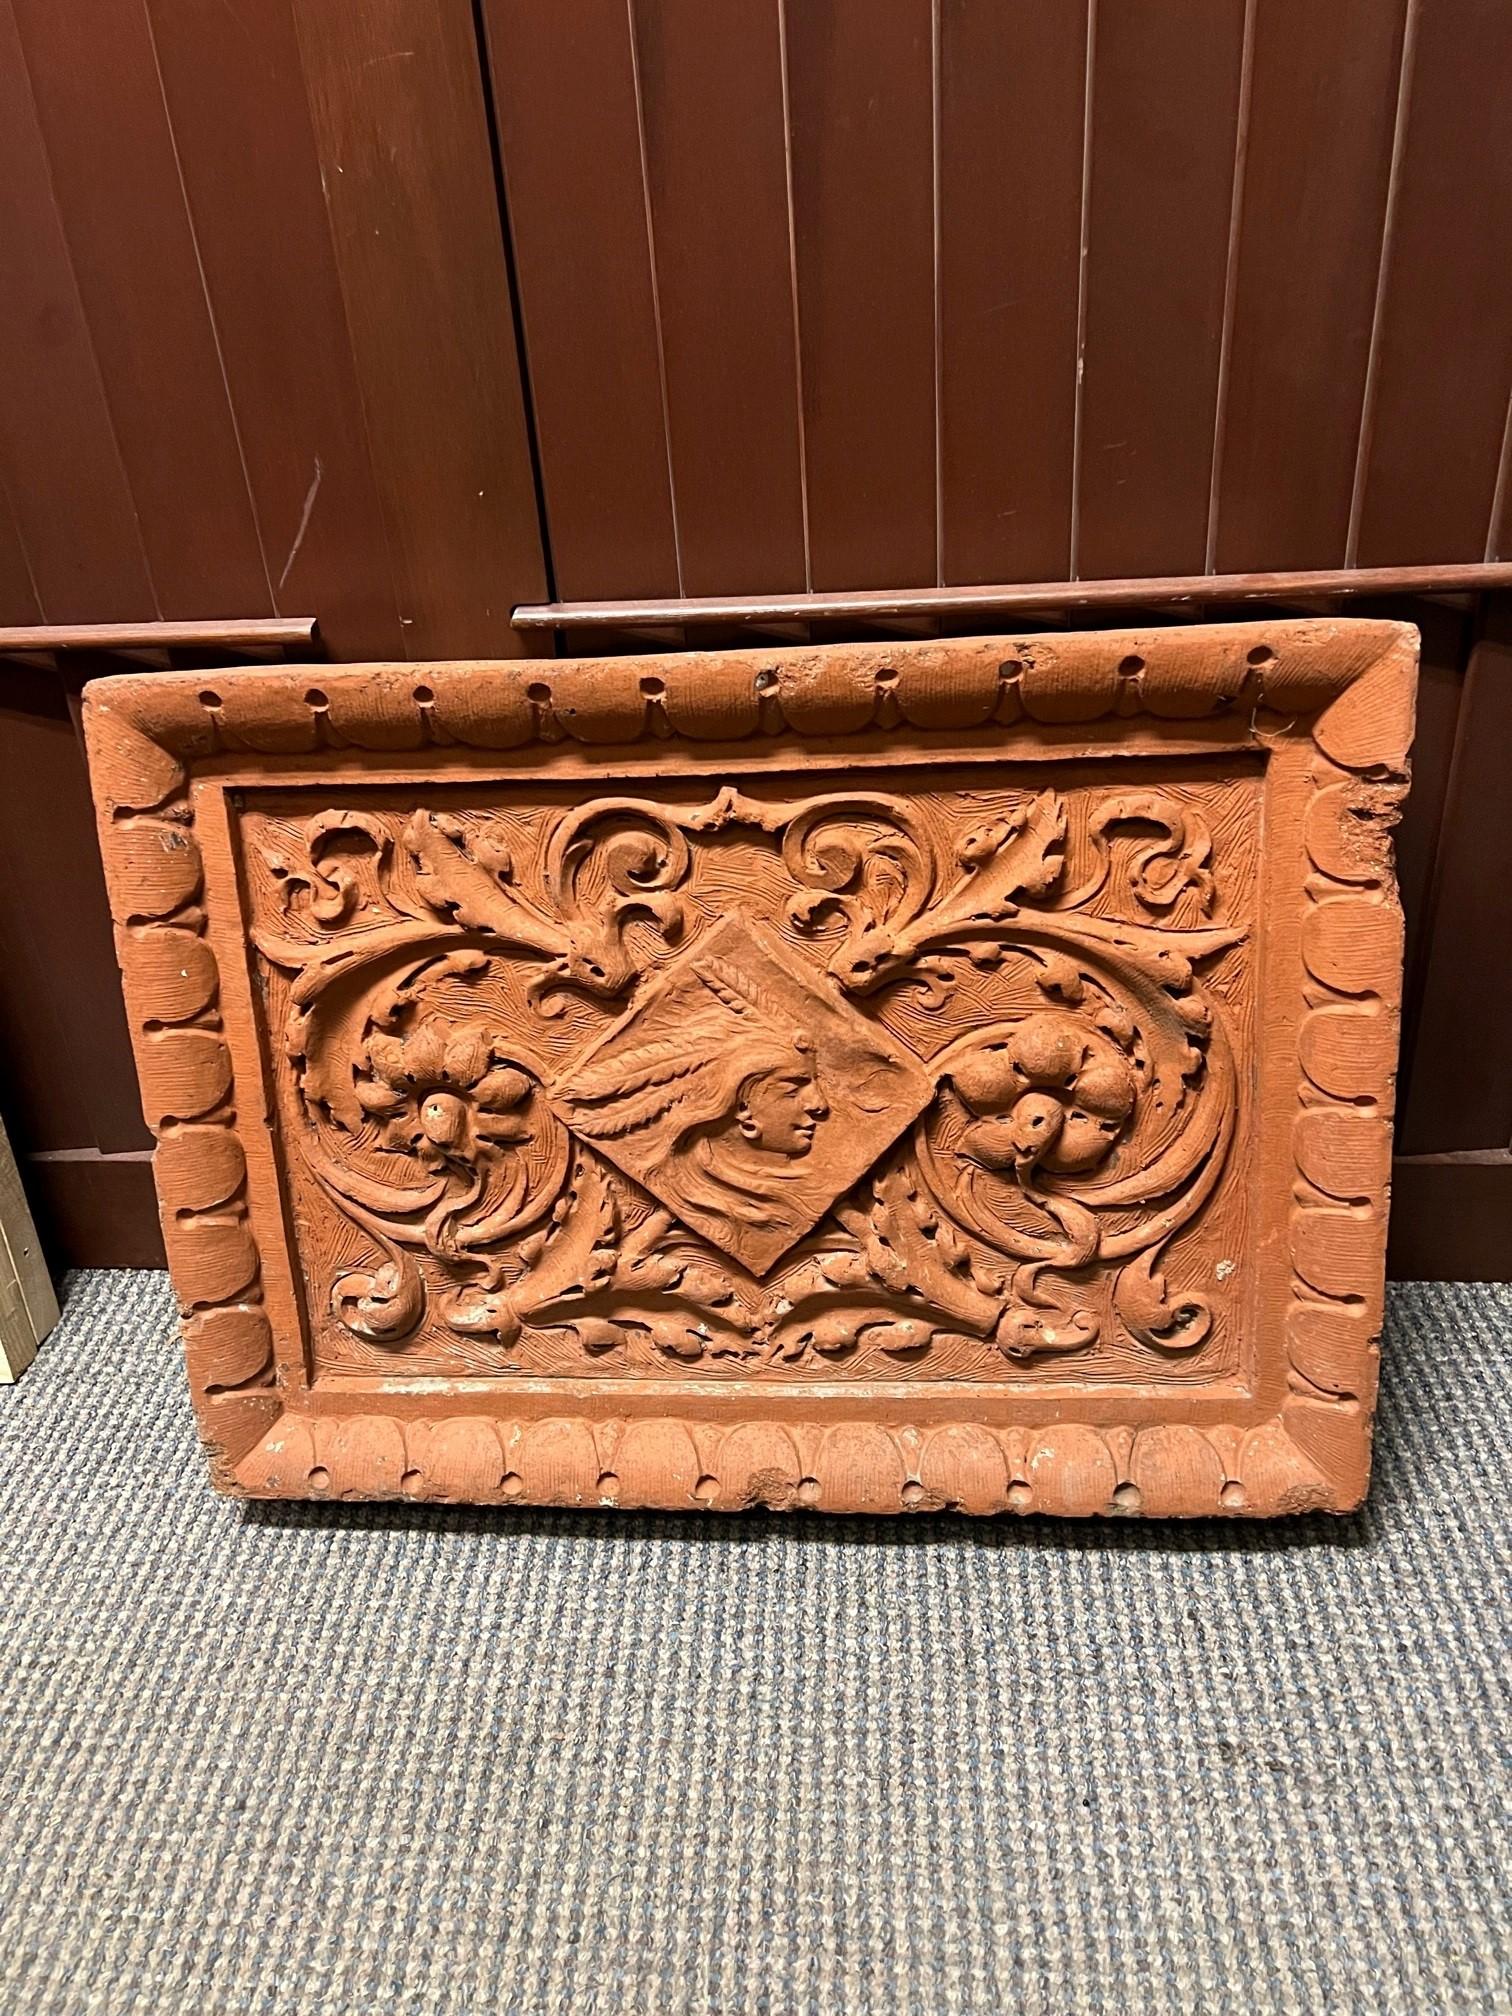 Early 20th century terra-cotta frieze, highly decorative with an Indian Head center and a egg and dart border. Salvaged from the façade of a New York City Building in the late 1970s its in very good condition. This is a great piece that would look